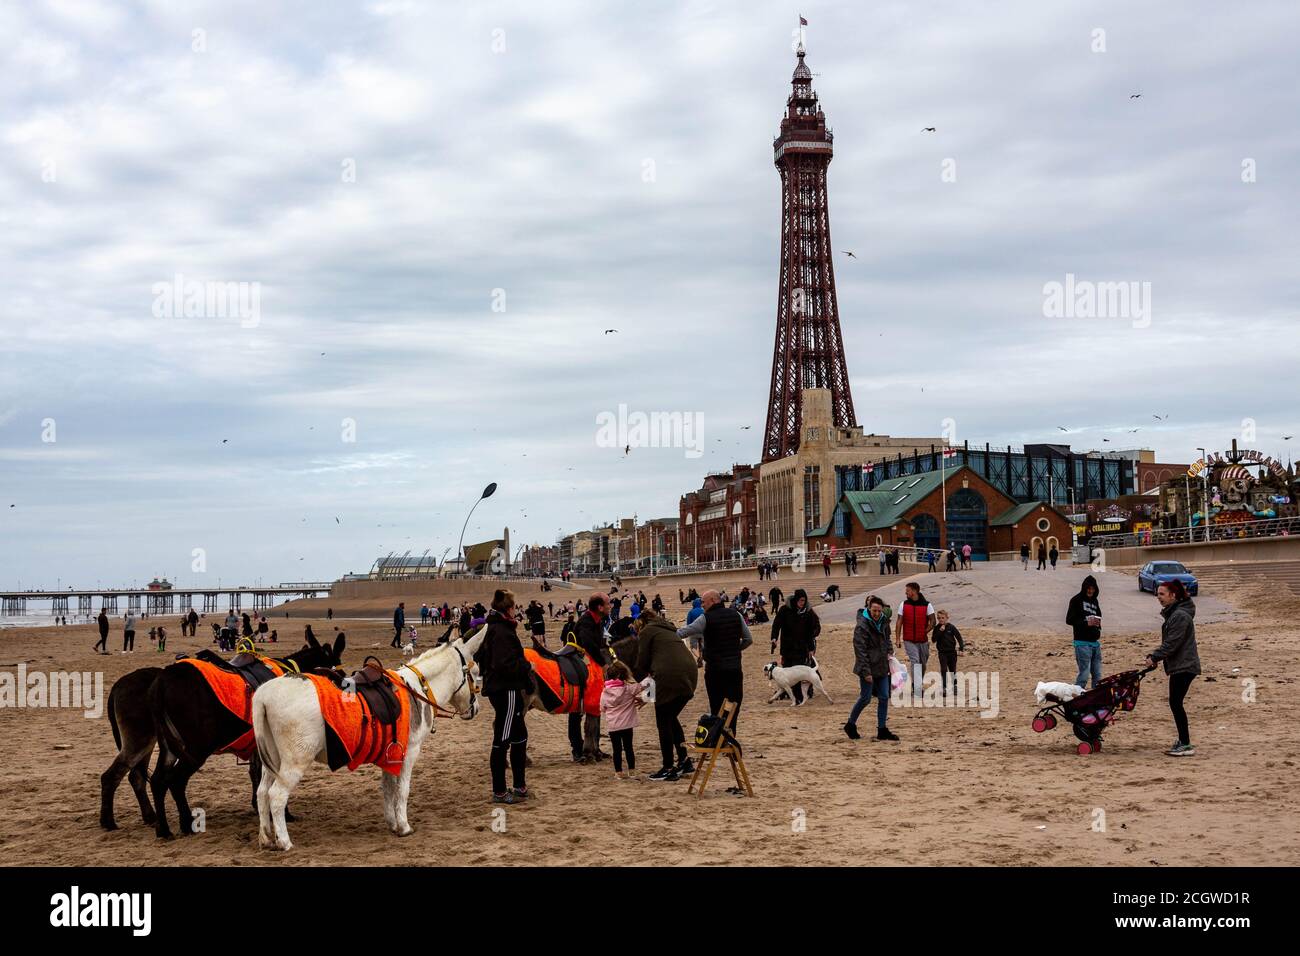 Blackpool, Lancashire, United Kingdom. 12th Sep, 2020. Donkeys rides on the beach in front of the Blackpool Tower Credit: PN News/Alamy Live News Stock Photo